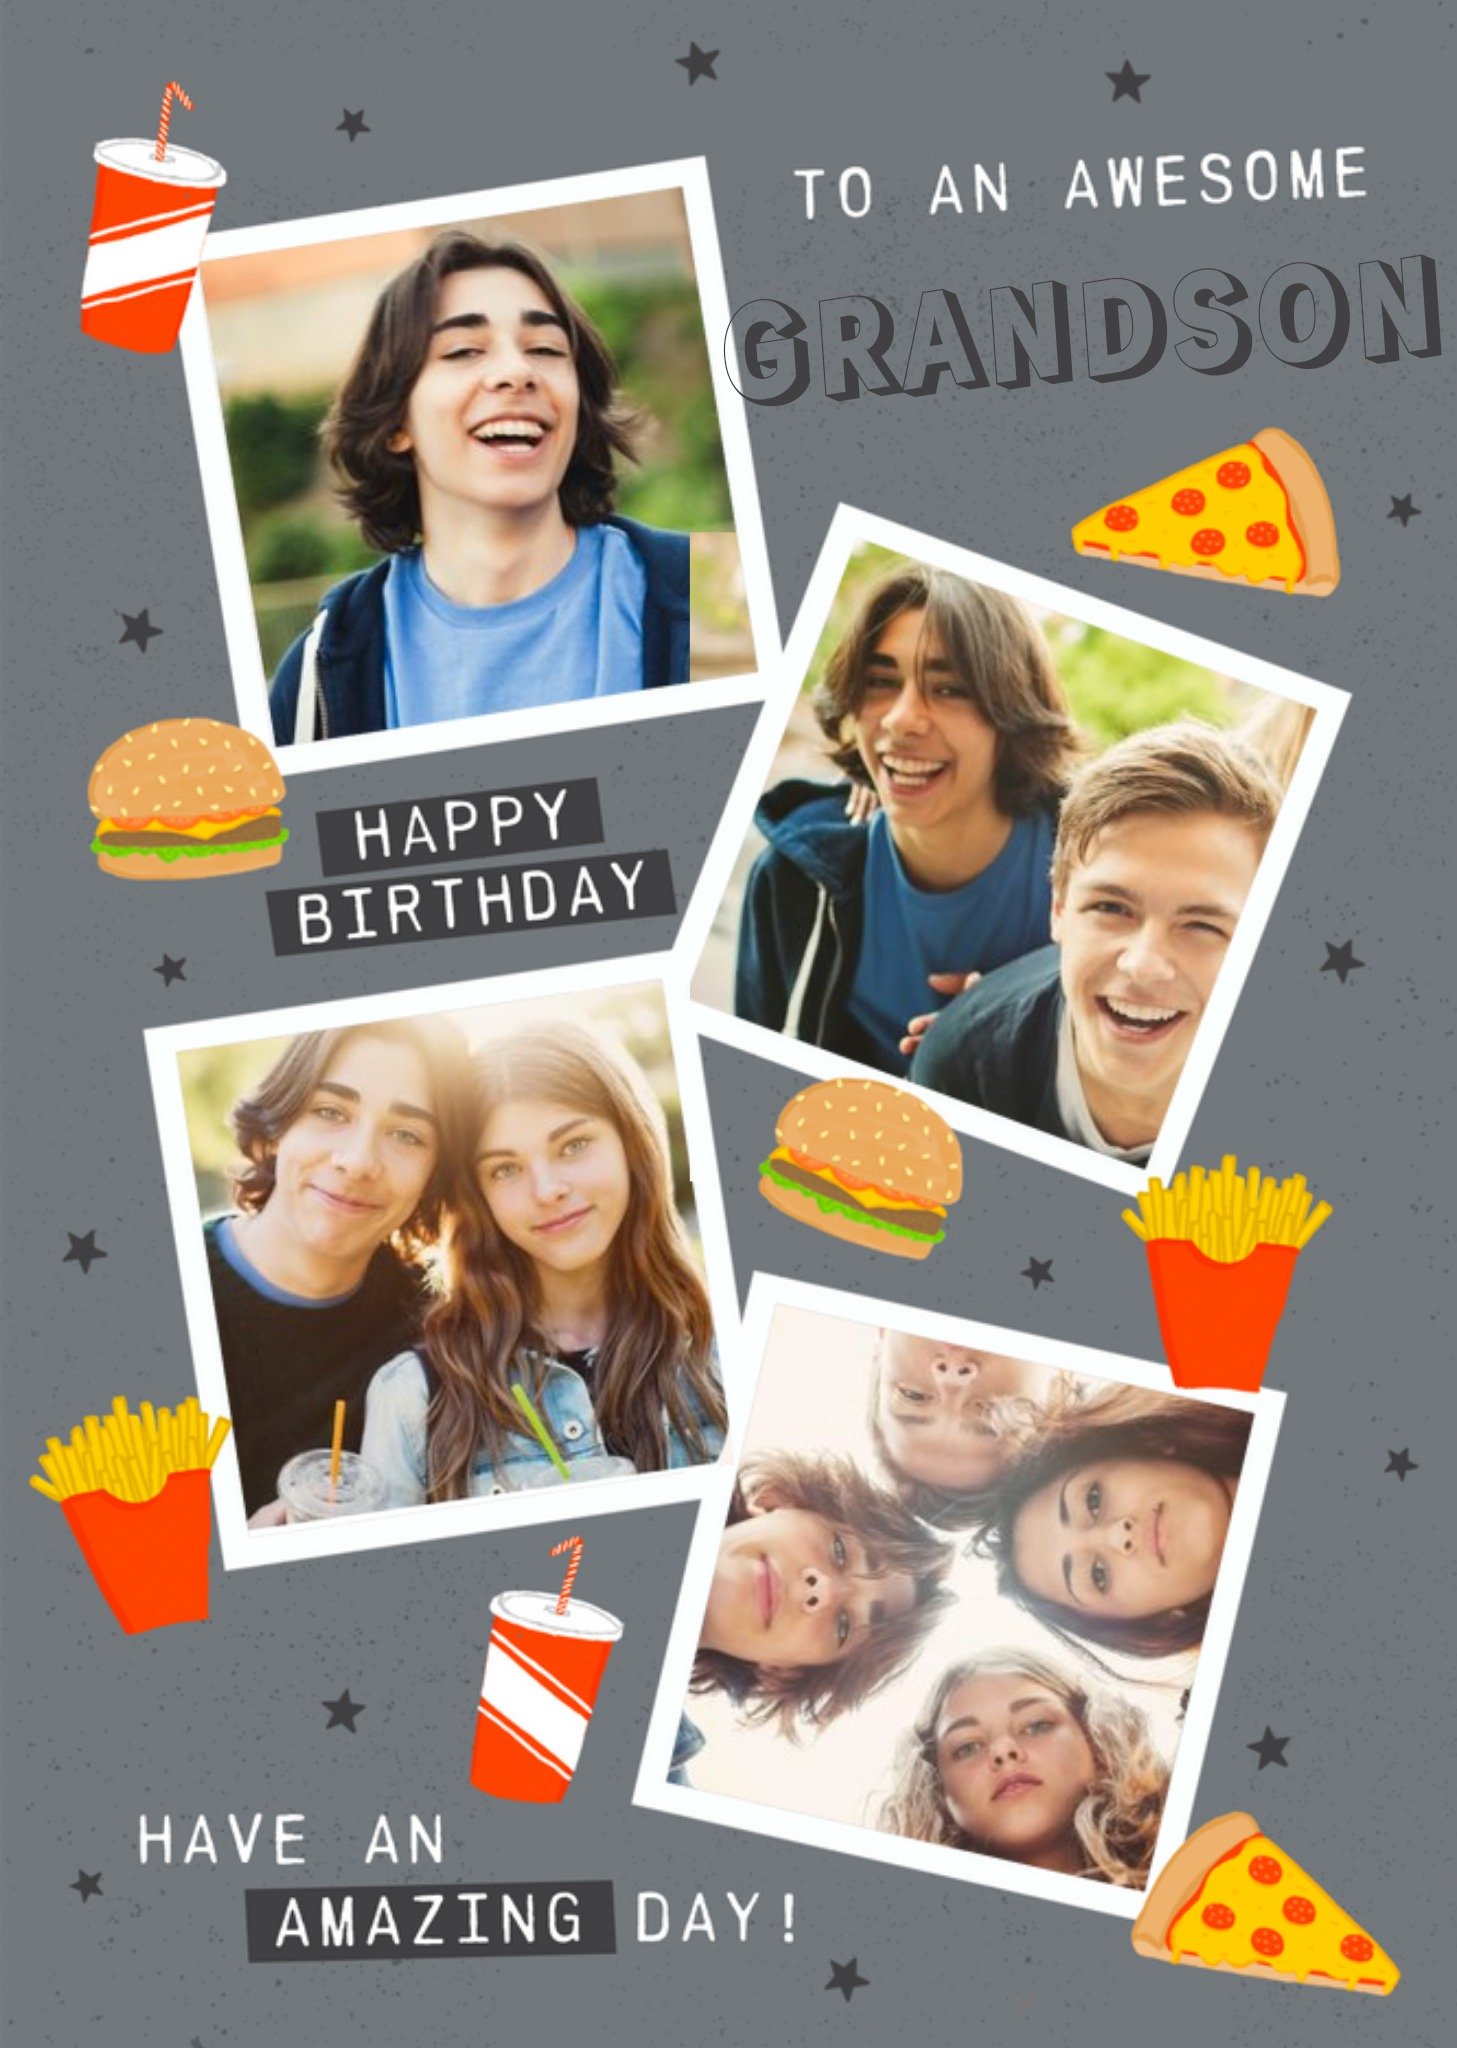 Moonpig To An Awesome Grandson Ilustrated Pizza Birthday Card Ecard